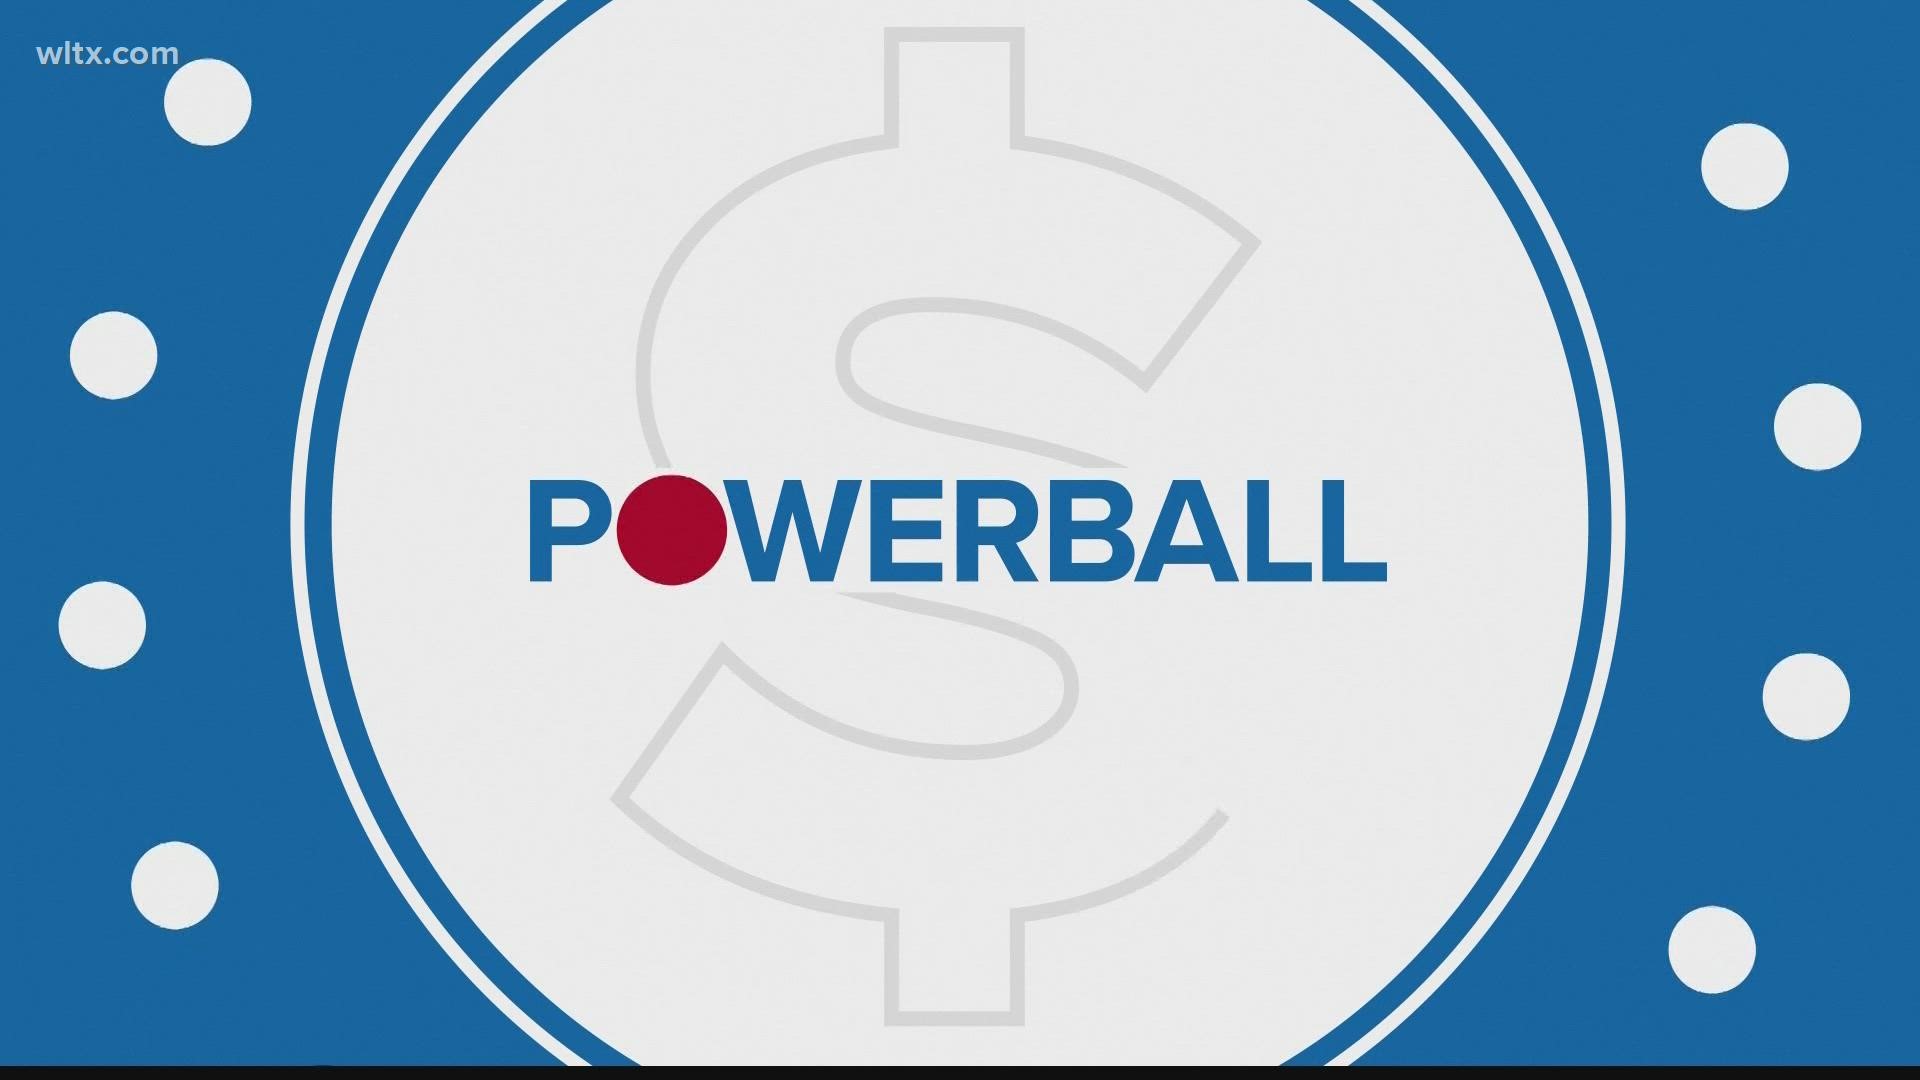 Here are the winning Powerball numbers for Monday, August 15, 2022.